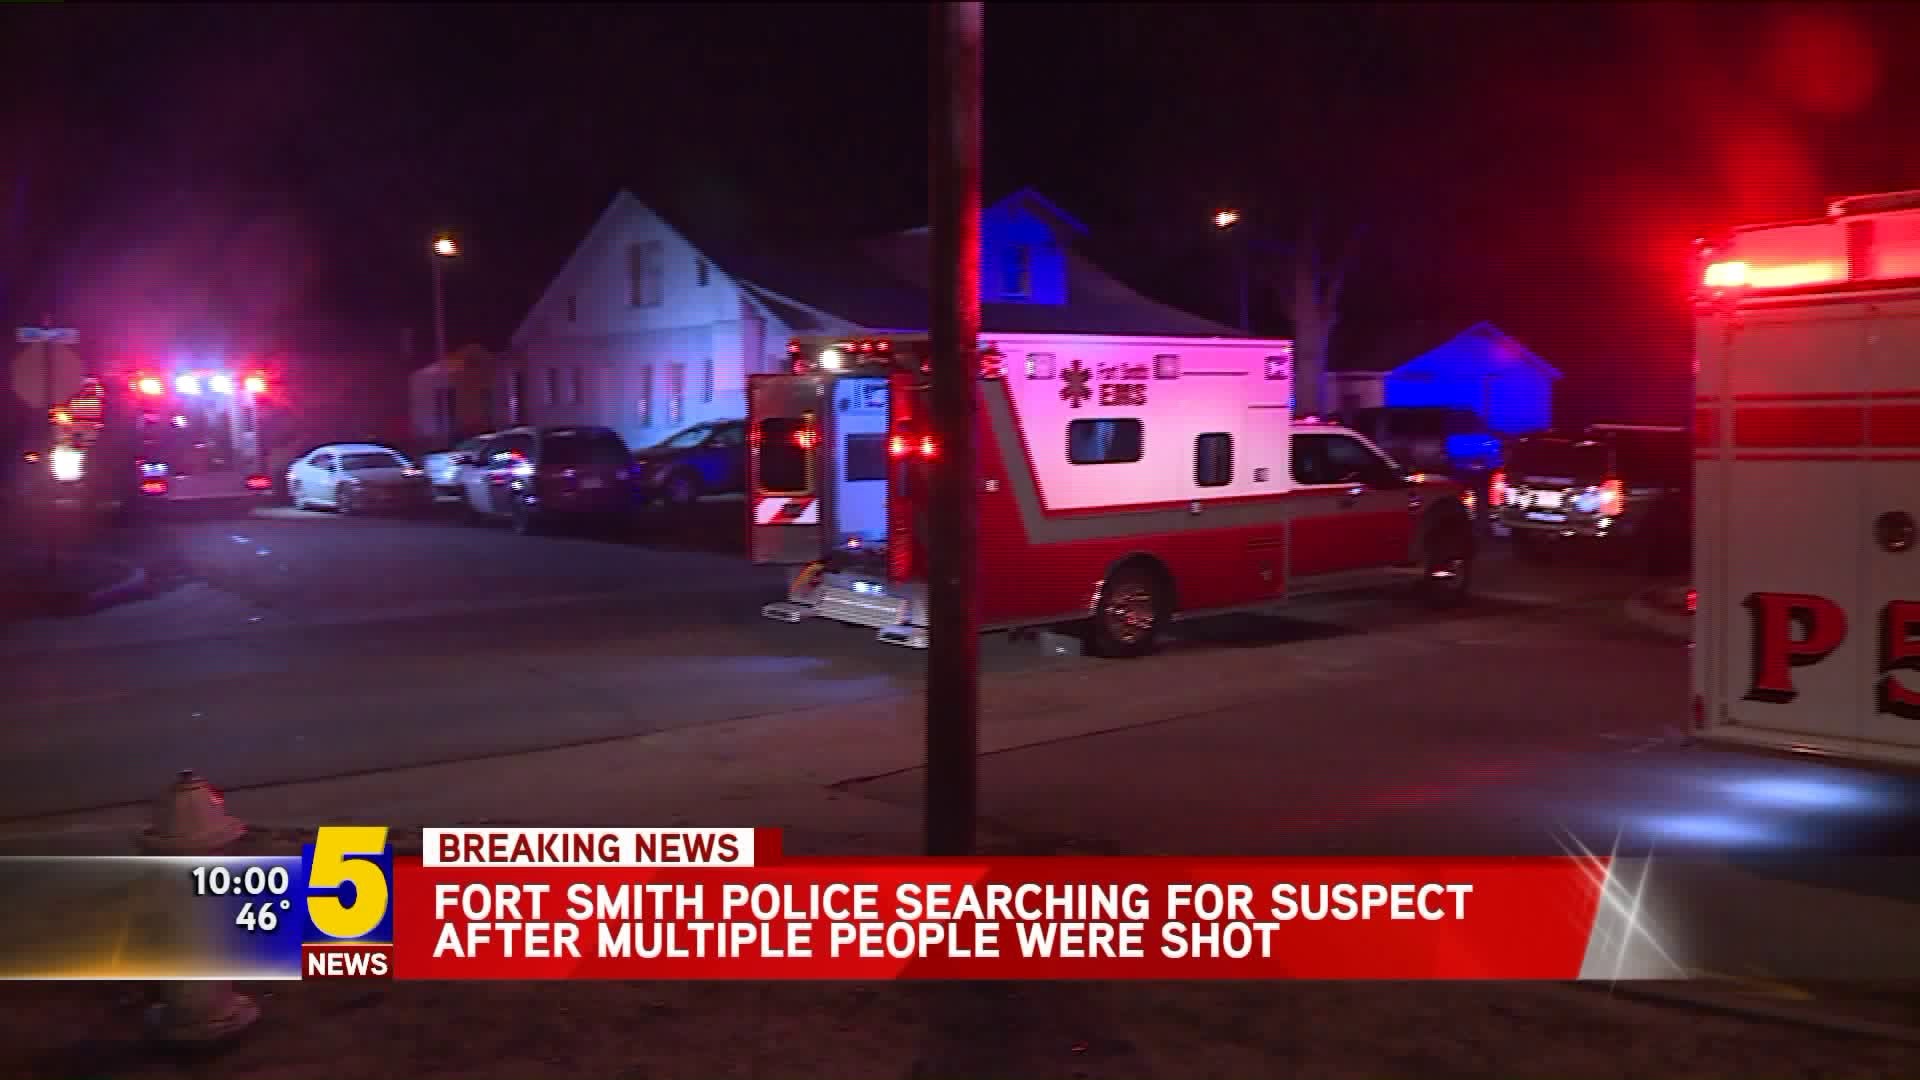 Fort Smith Police Searching for Suspect After Multiple People were Shot